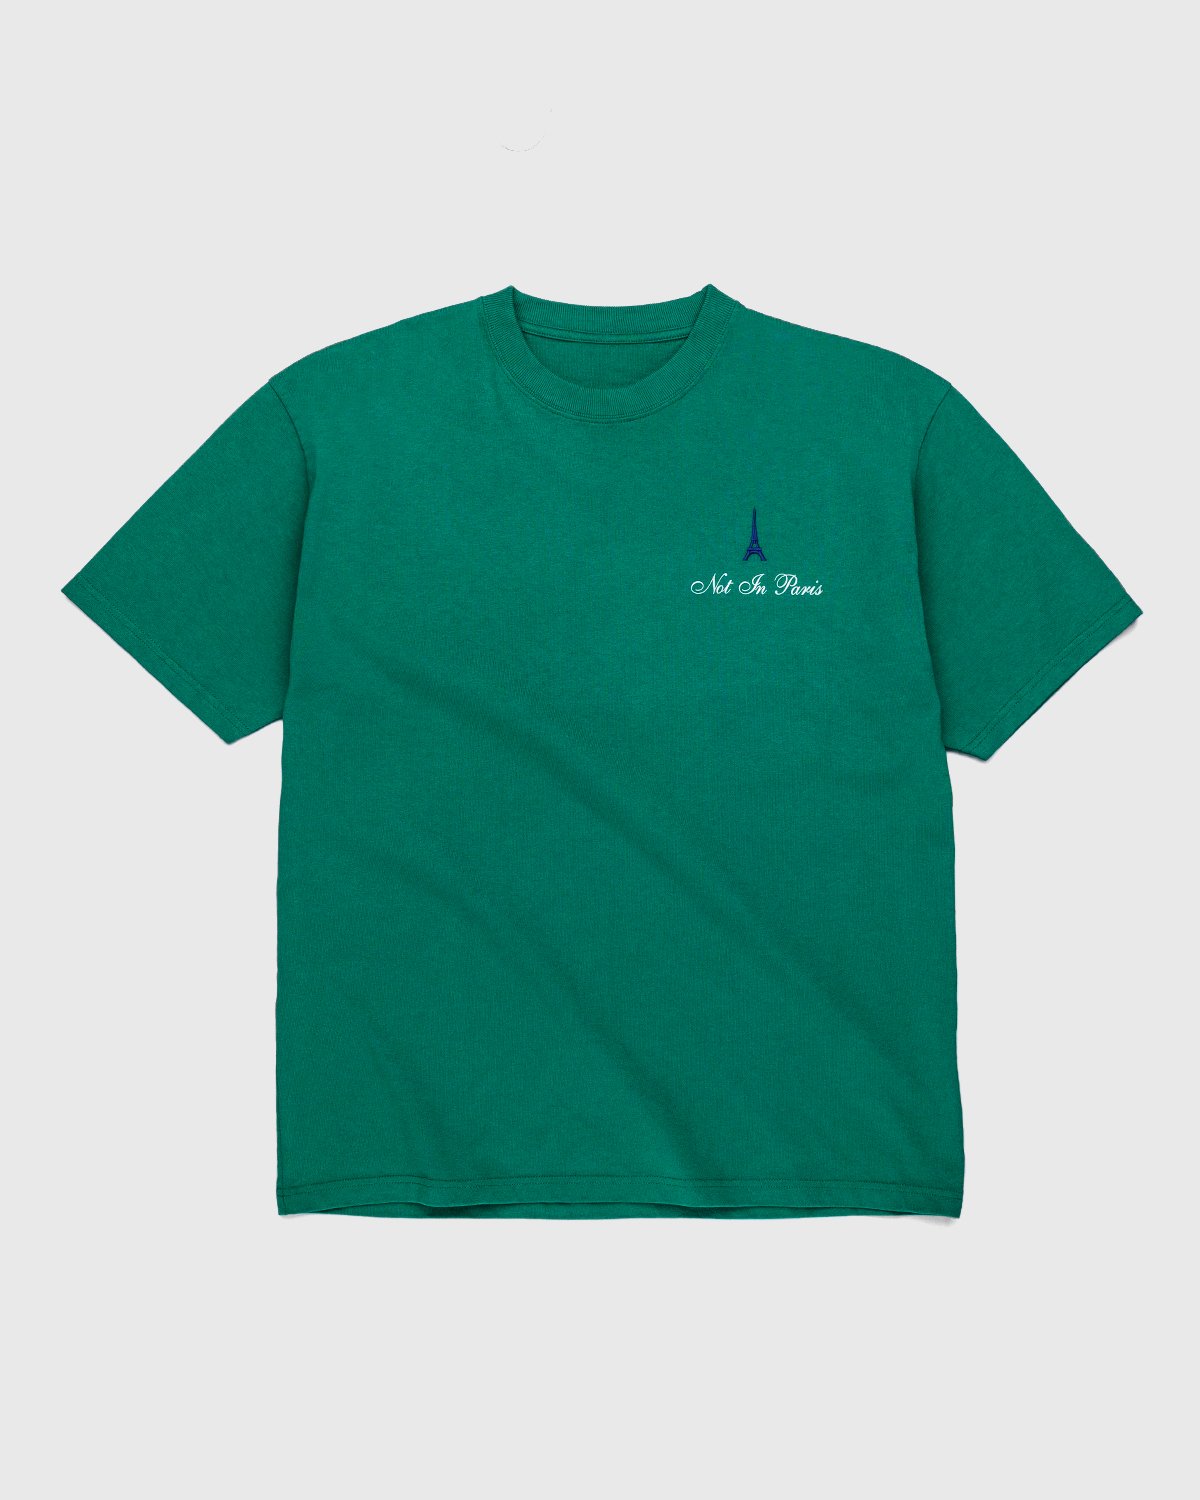 Highsnobiety - Not in Paris 3 T-Shirt Green - Clothing - Green - Image 2